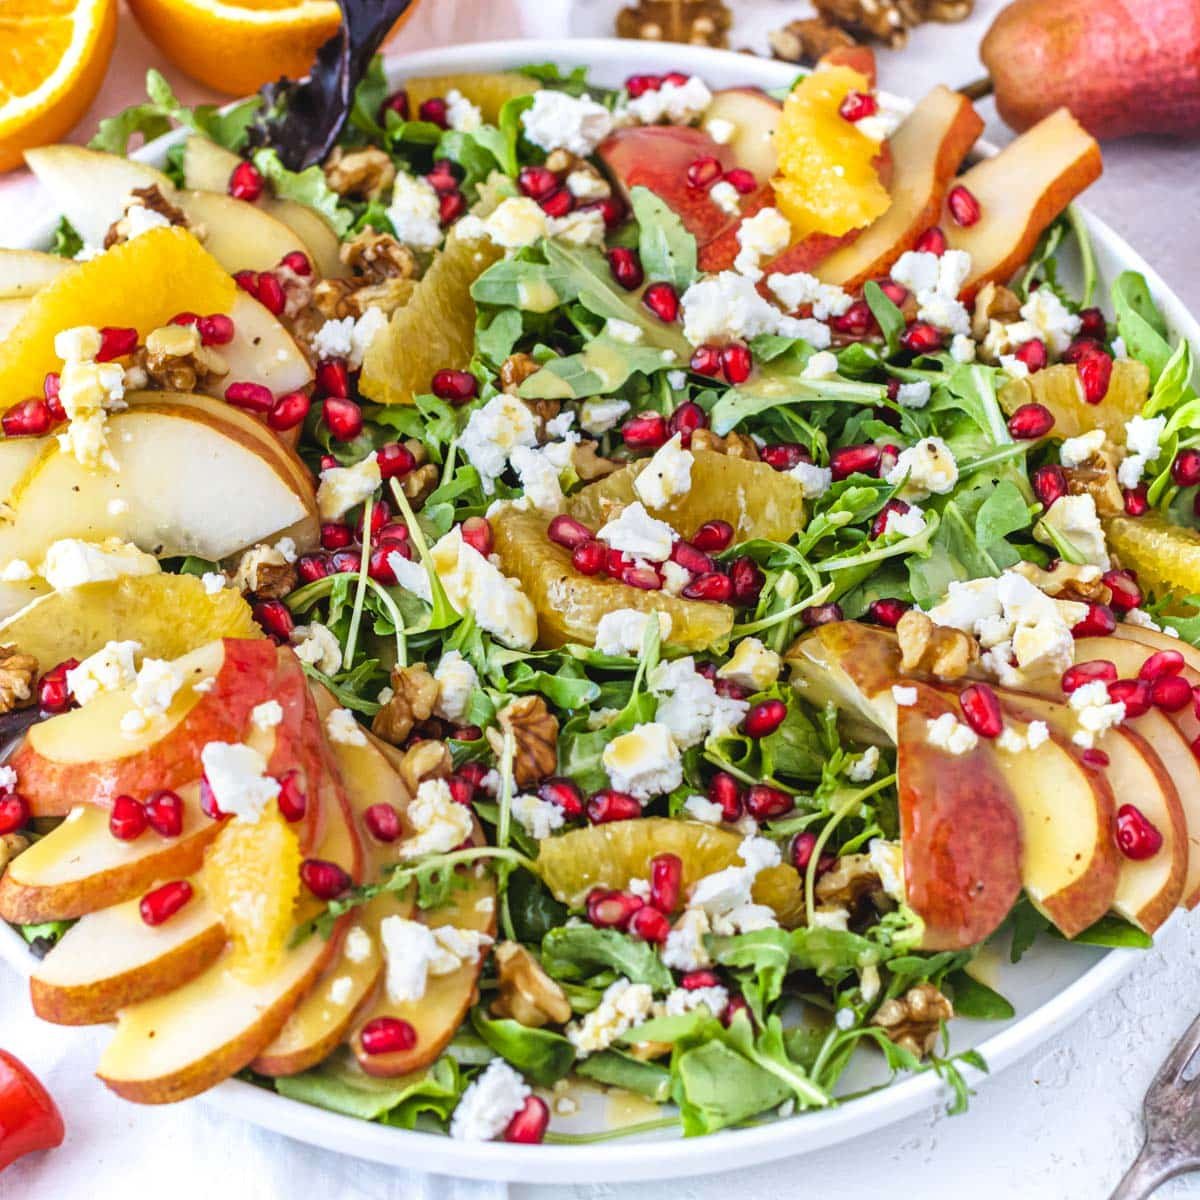 pear salad with feta, oranges, and walnuts